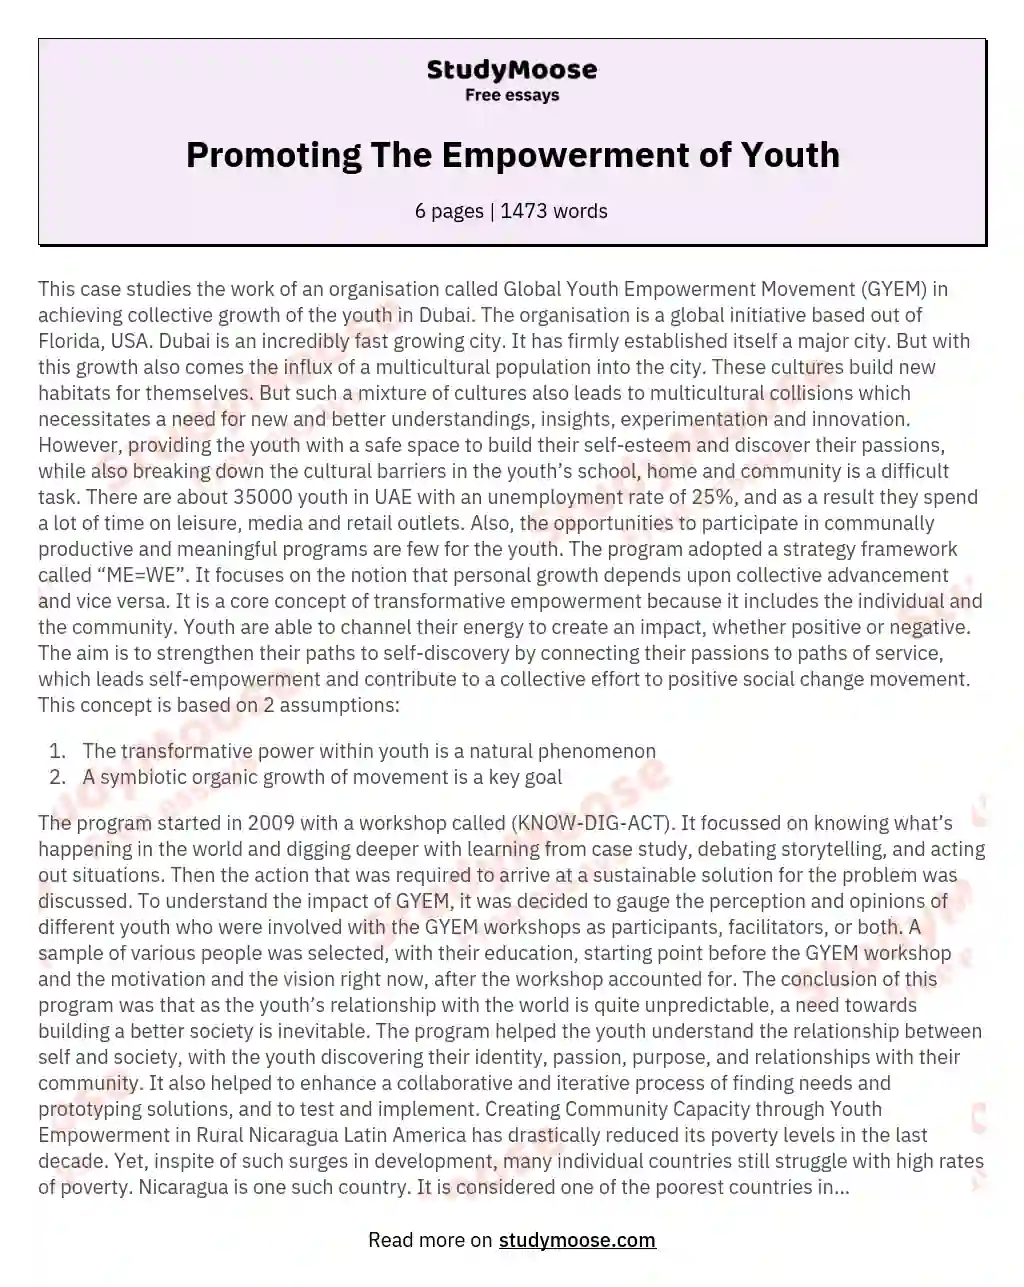 Promoting The Empowerment of Youth essay